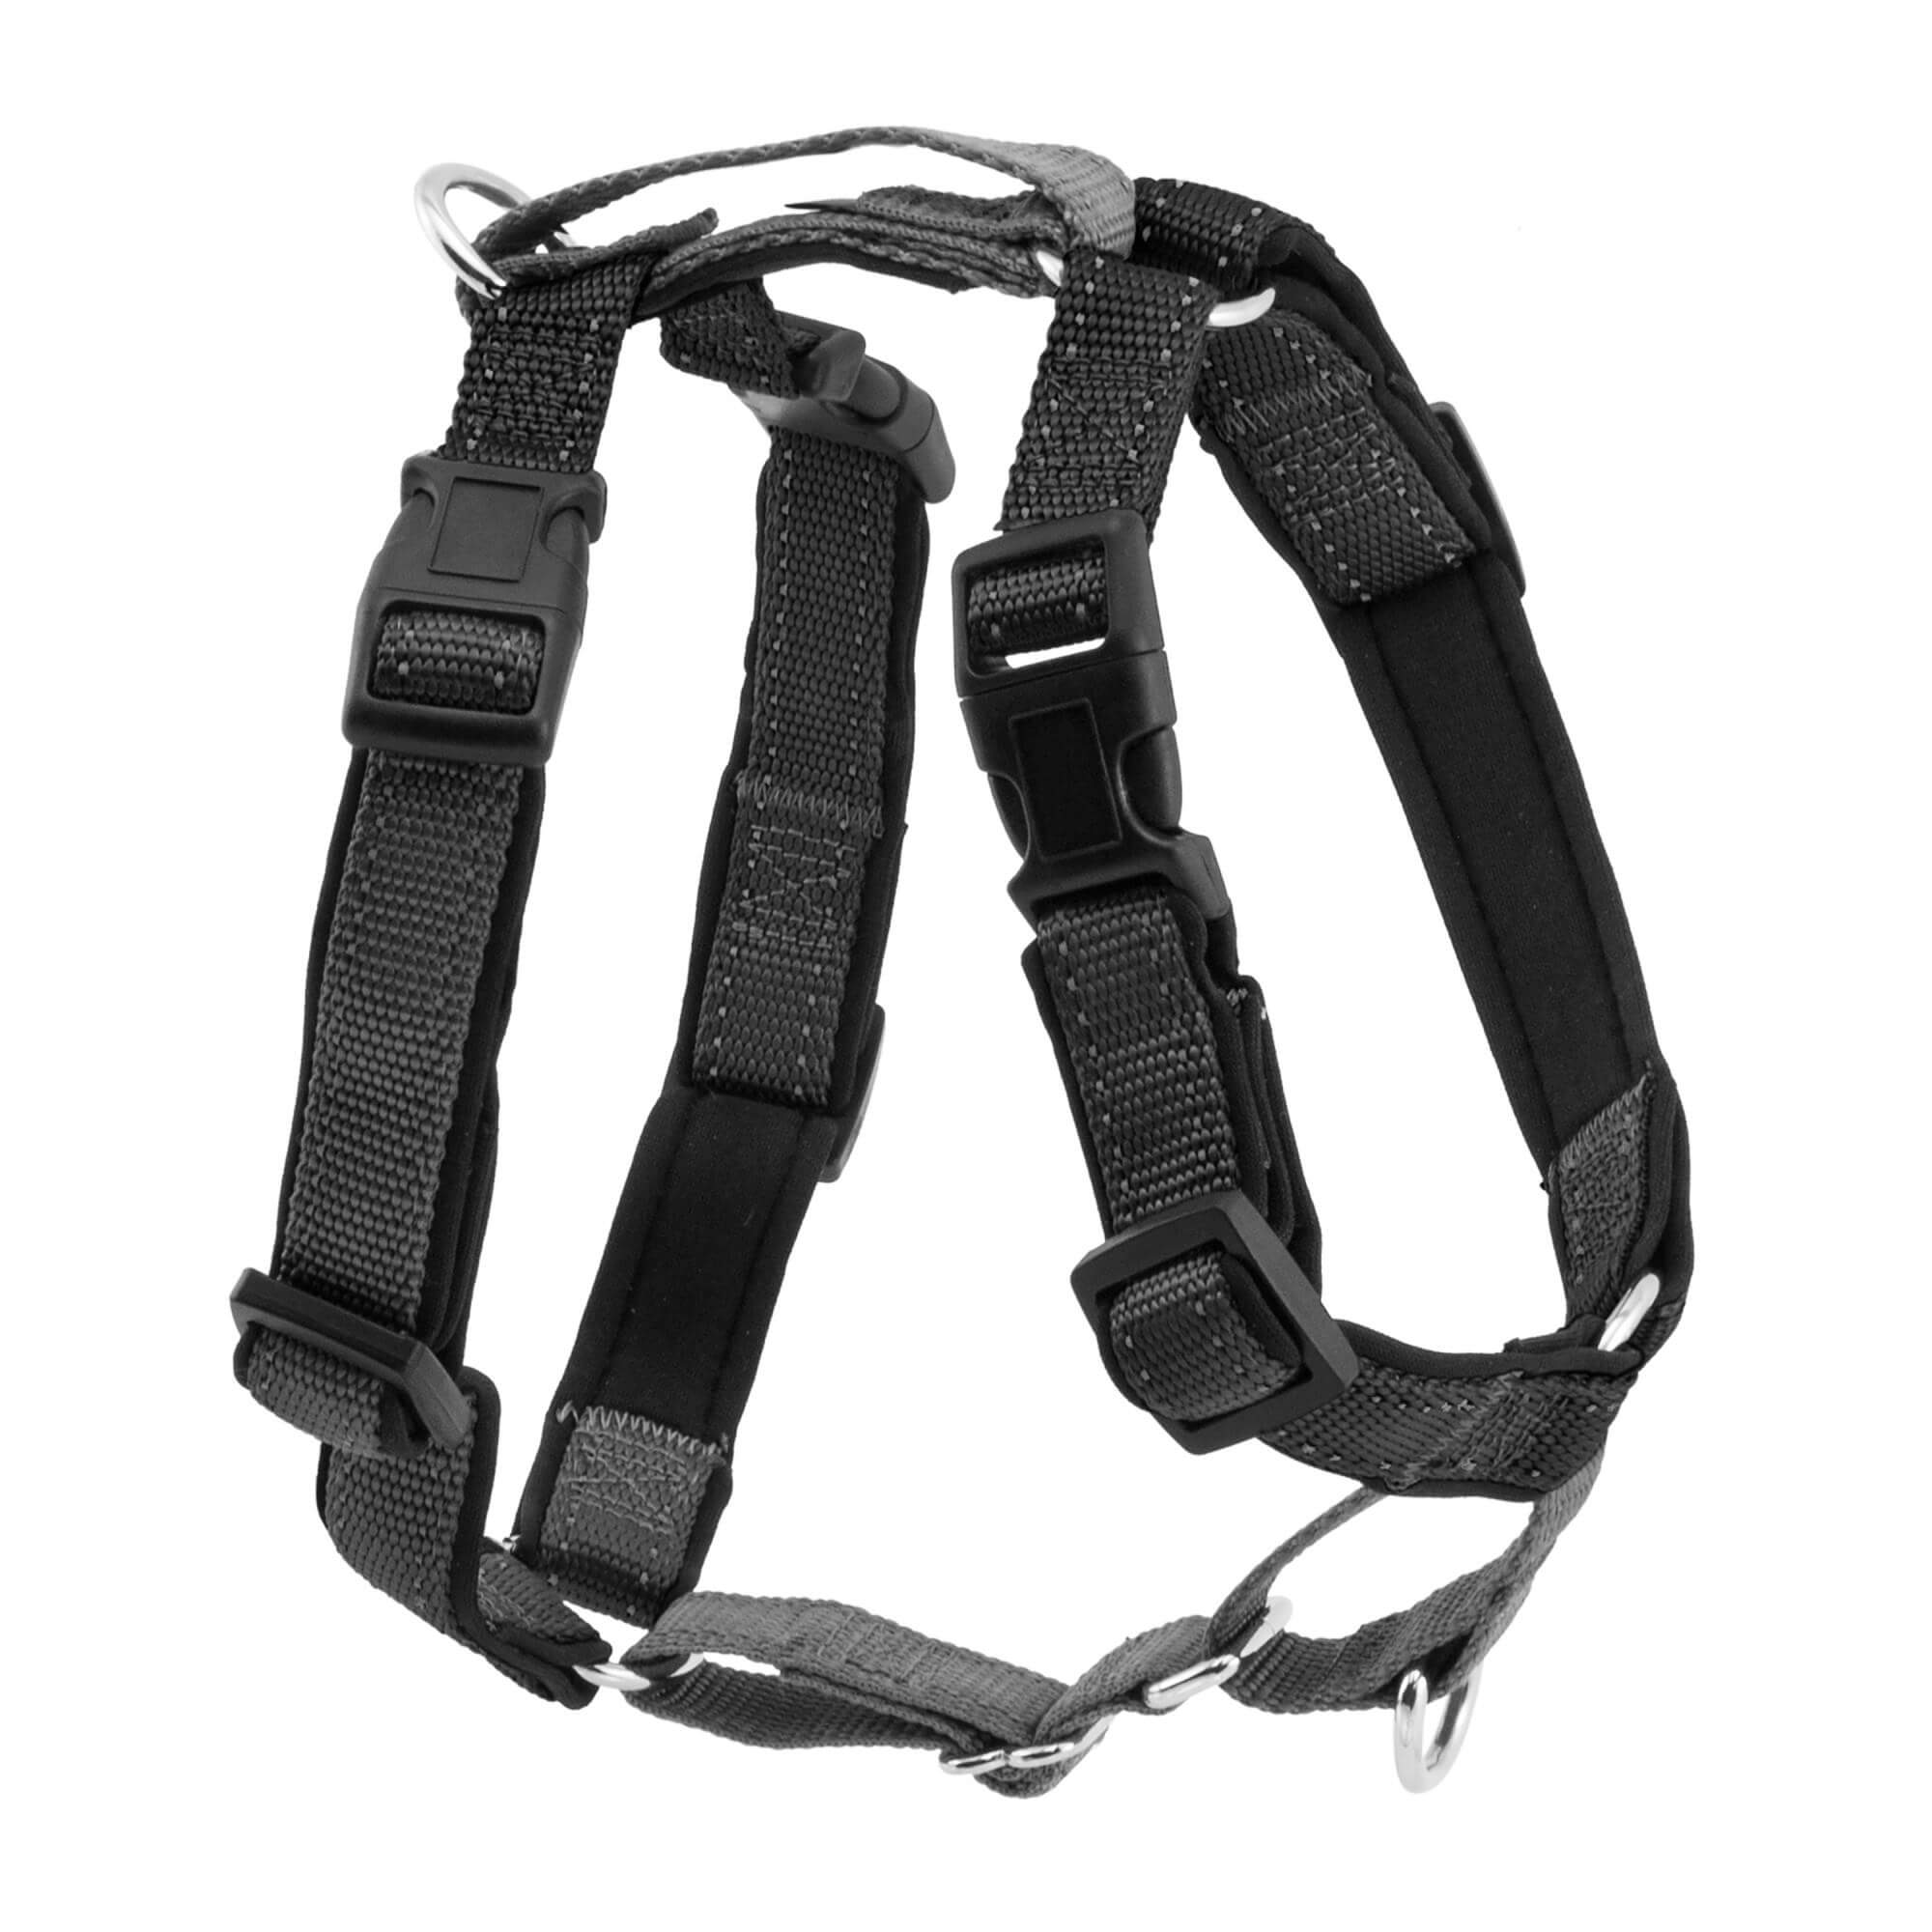 PetSafe 3 in 1 black dog harness small